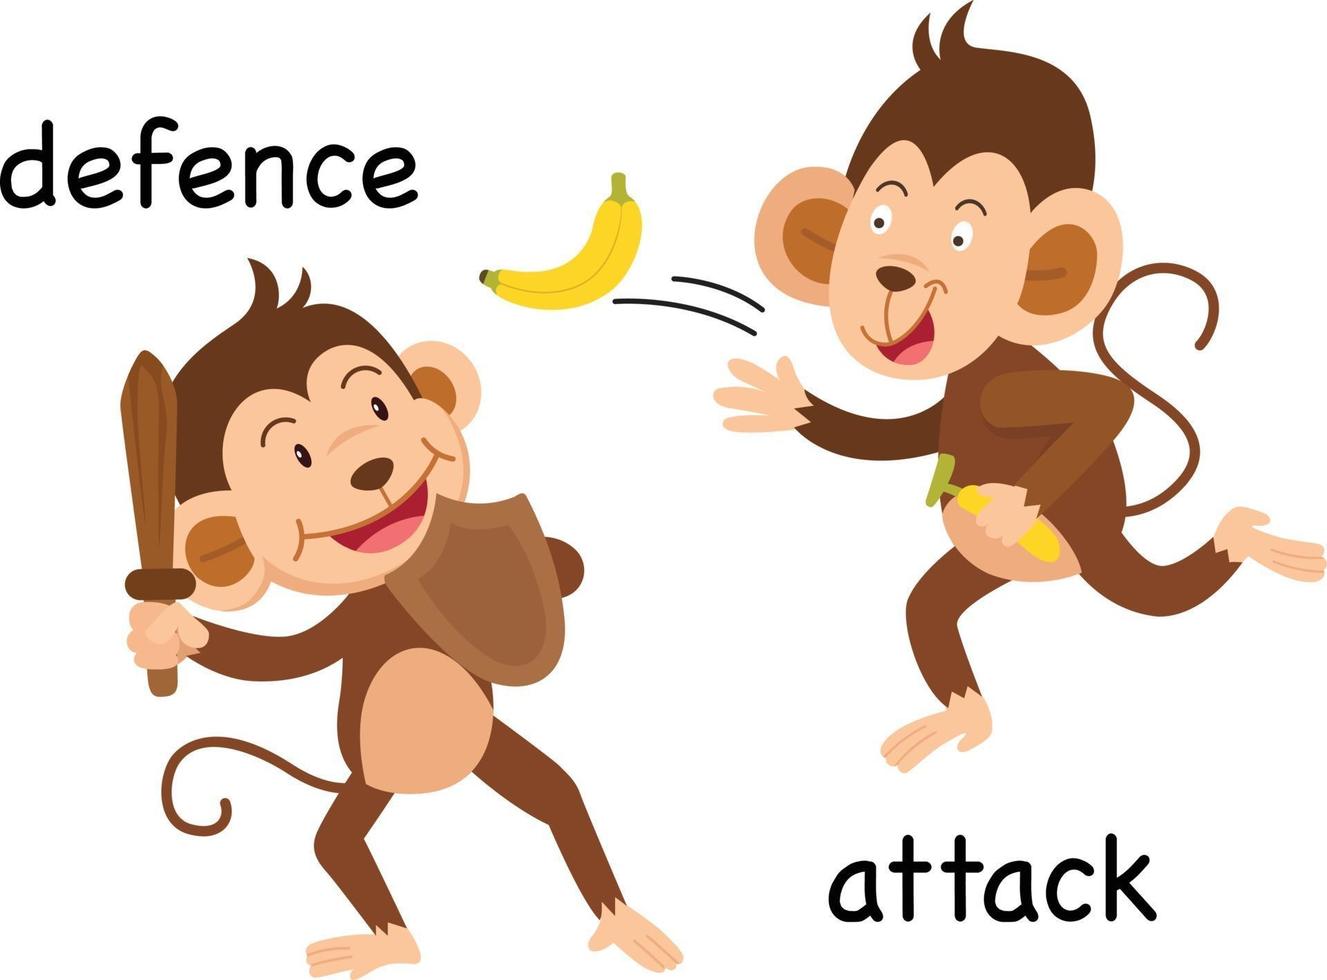 Opposite defence and attack illustration vector